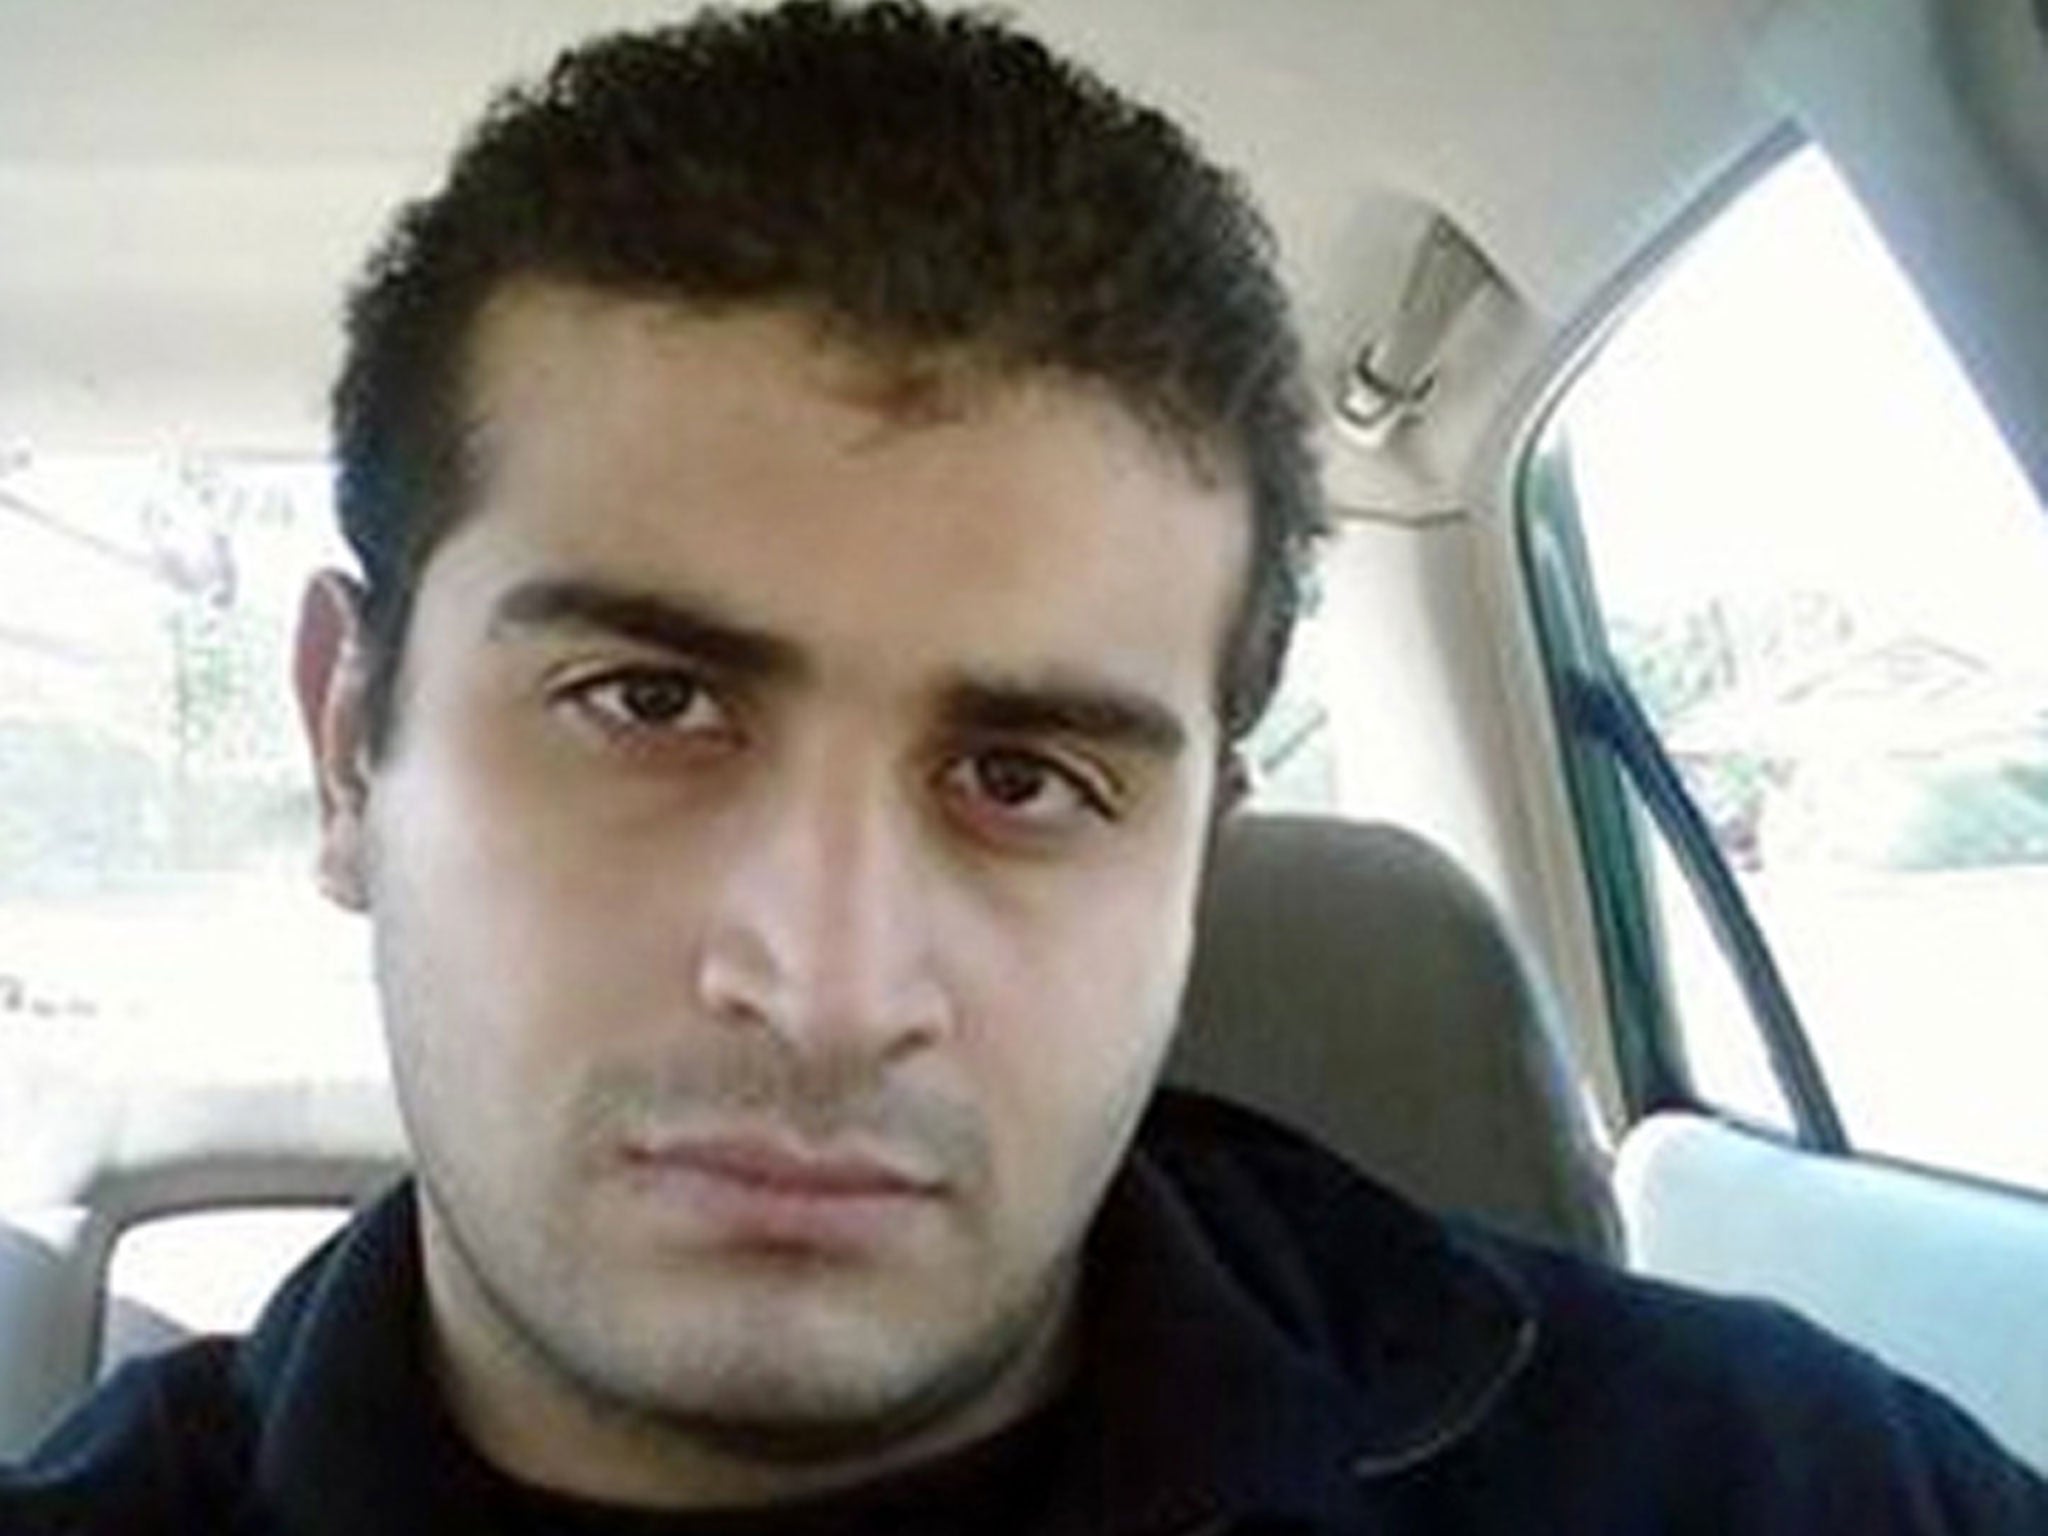 Gunman Omar Mateen was radicalised by information he accessed on the internet